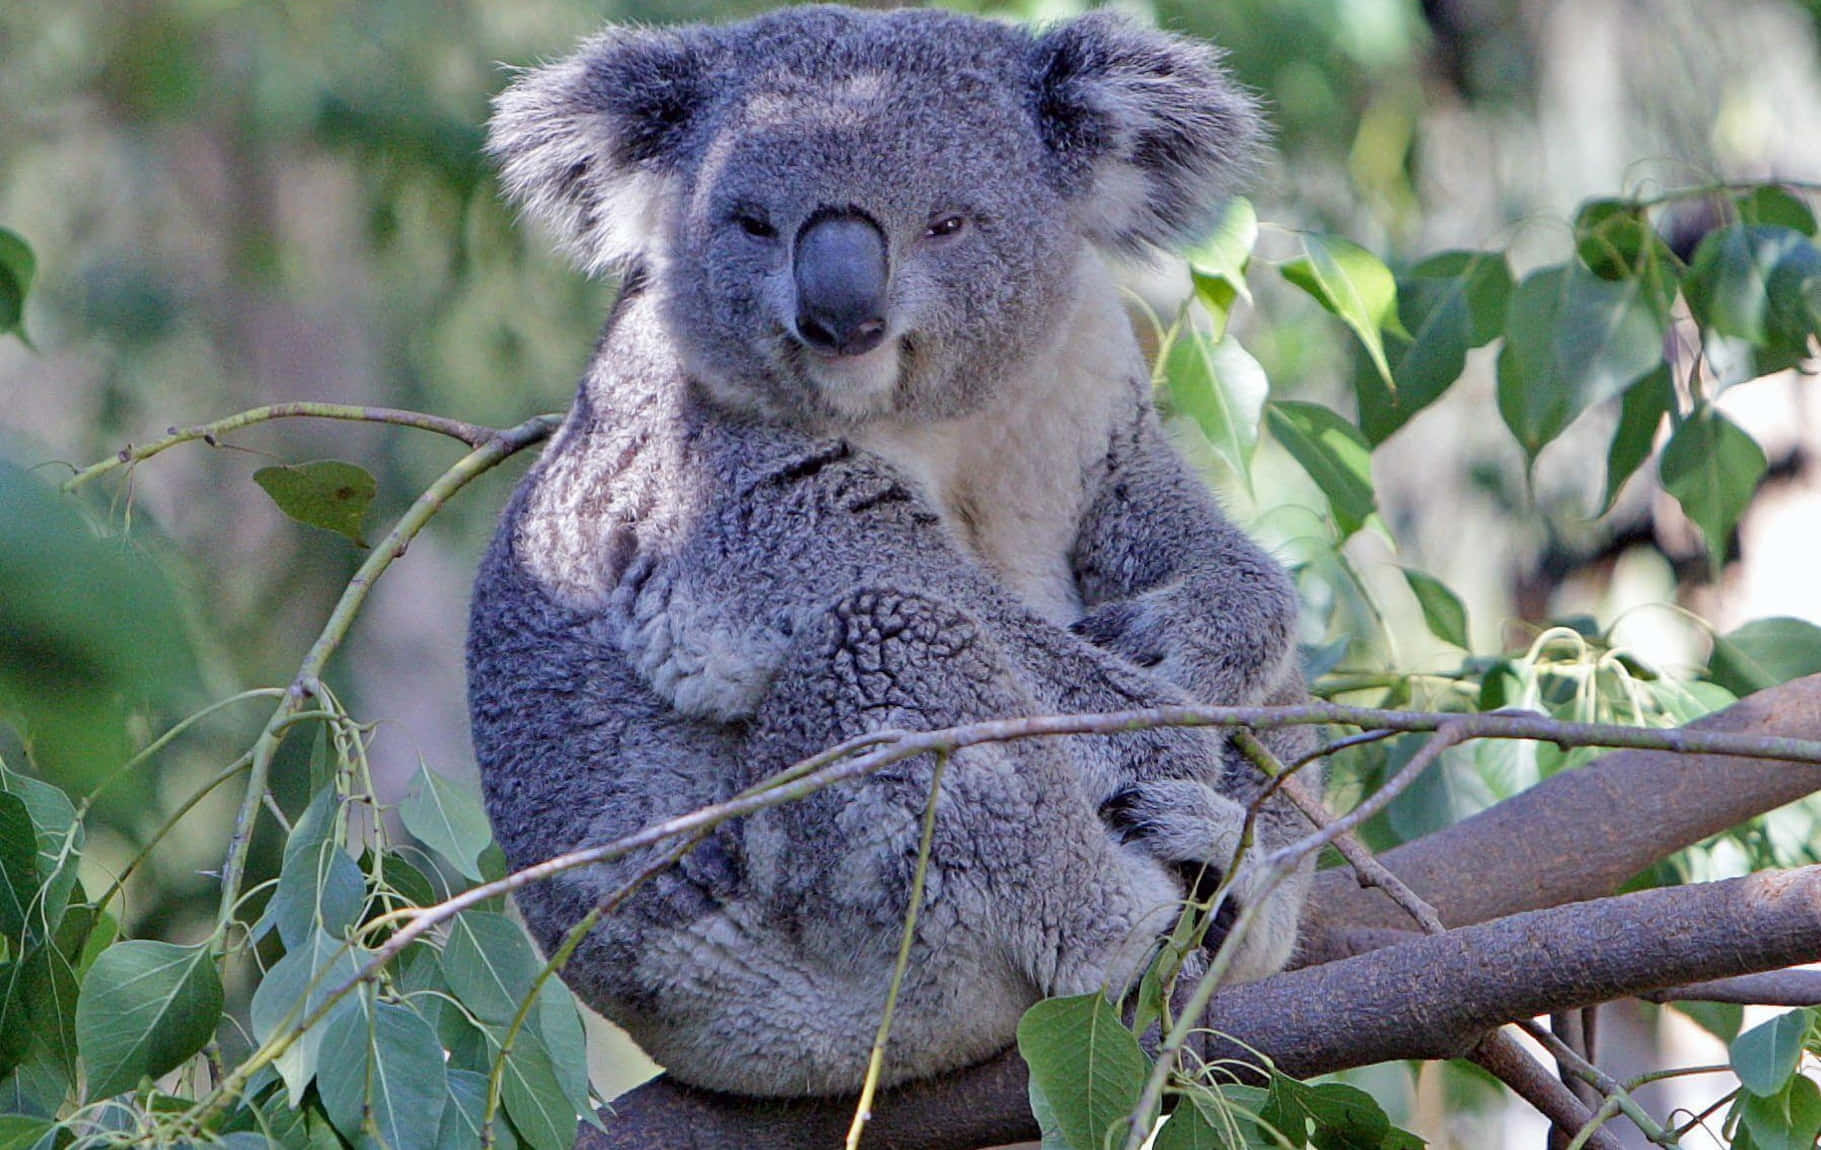 A koala bear perched in a tree reaching for some leaves